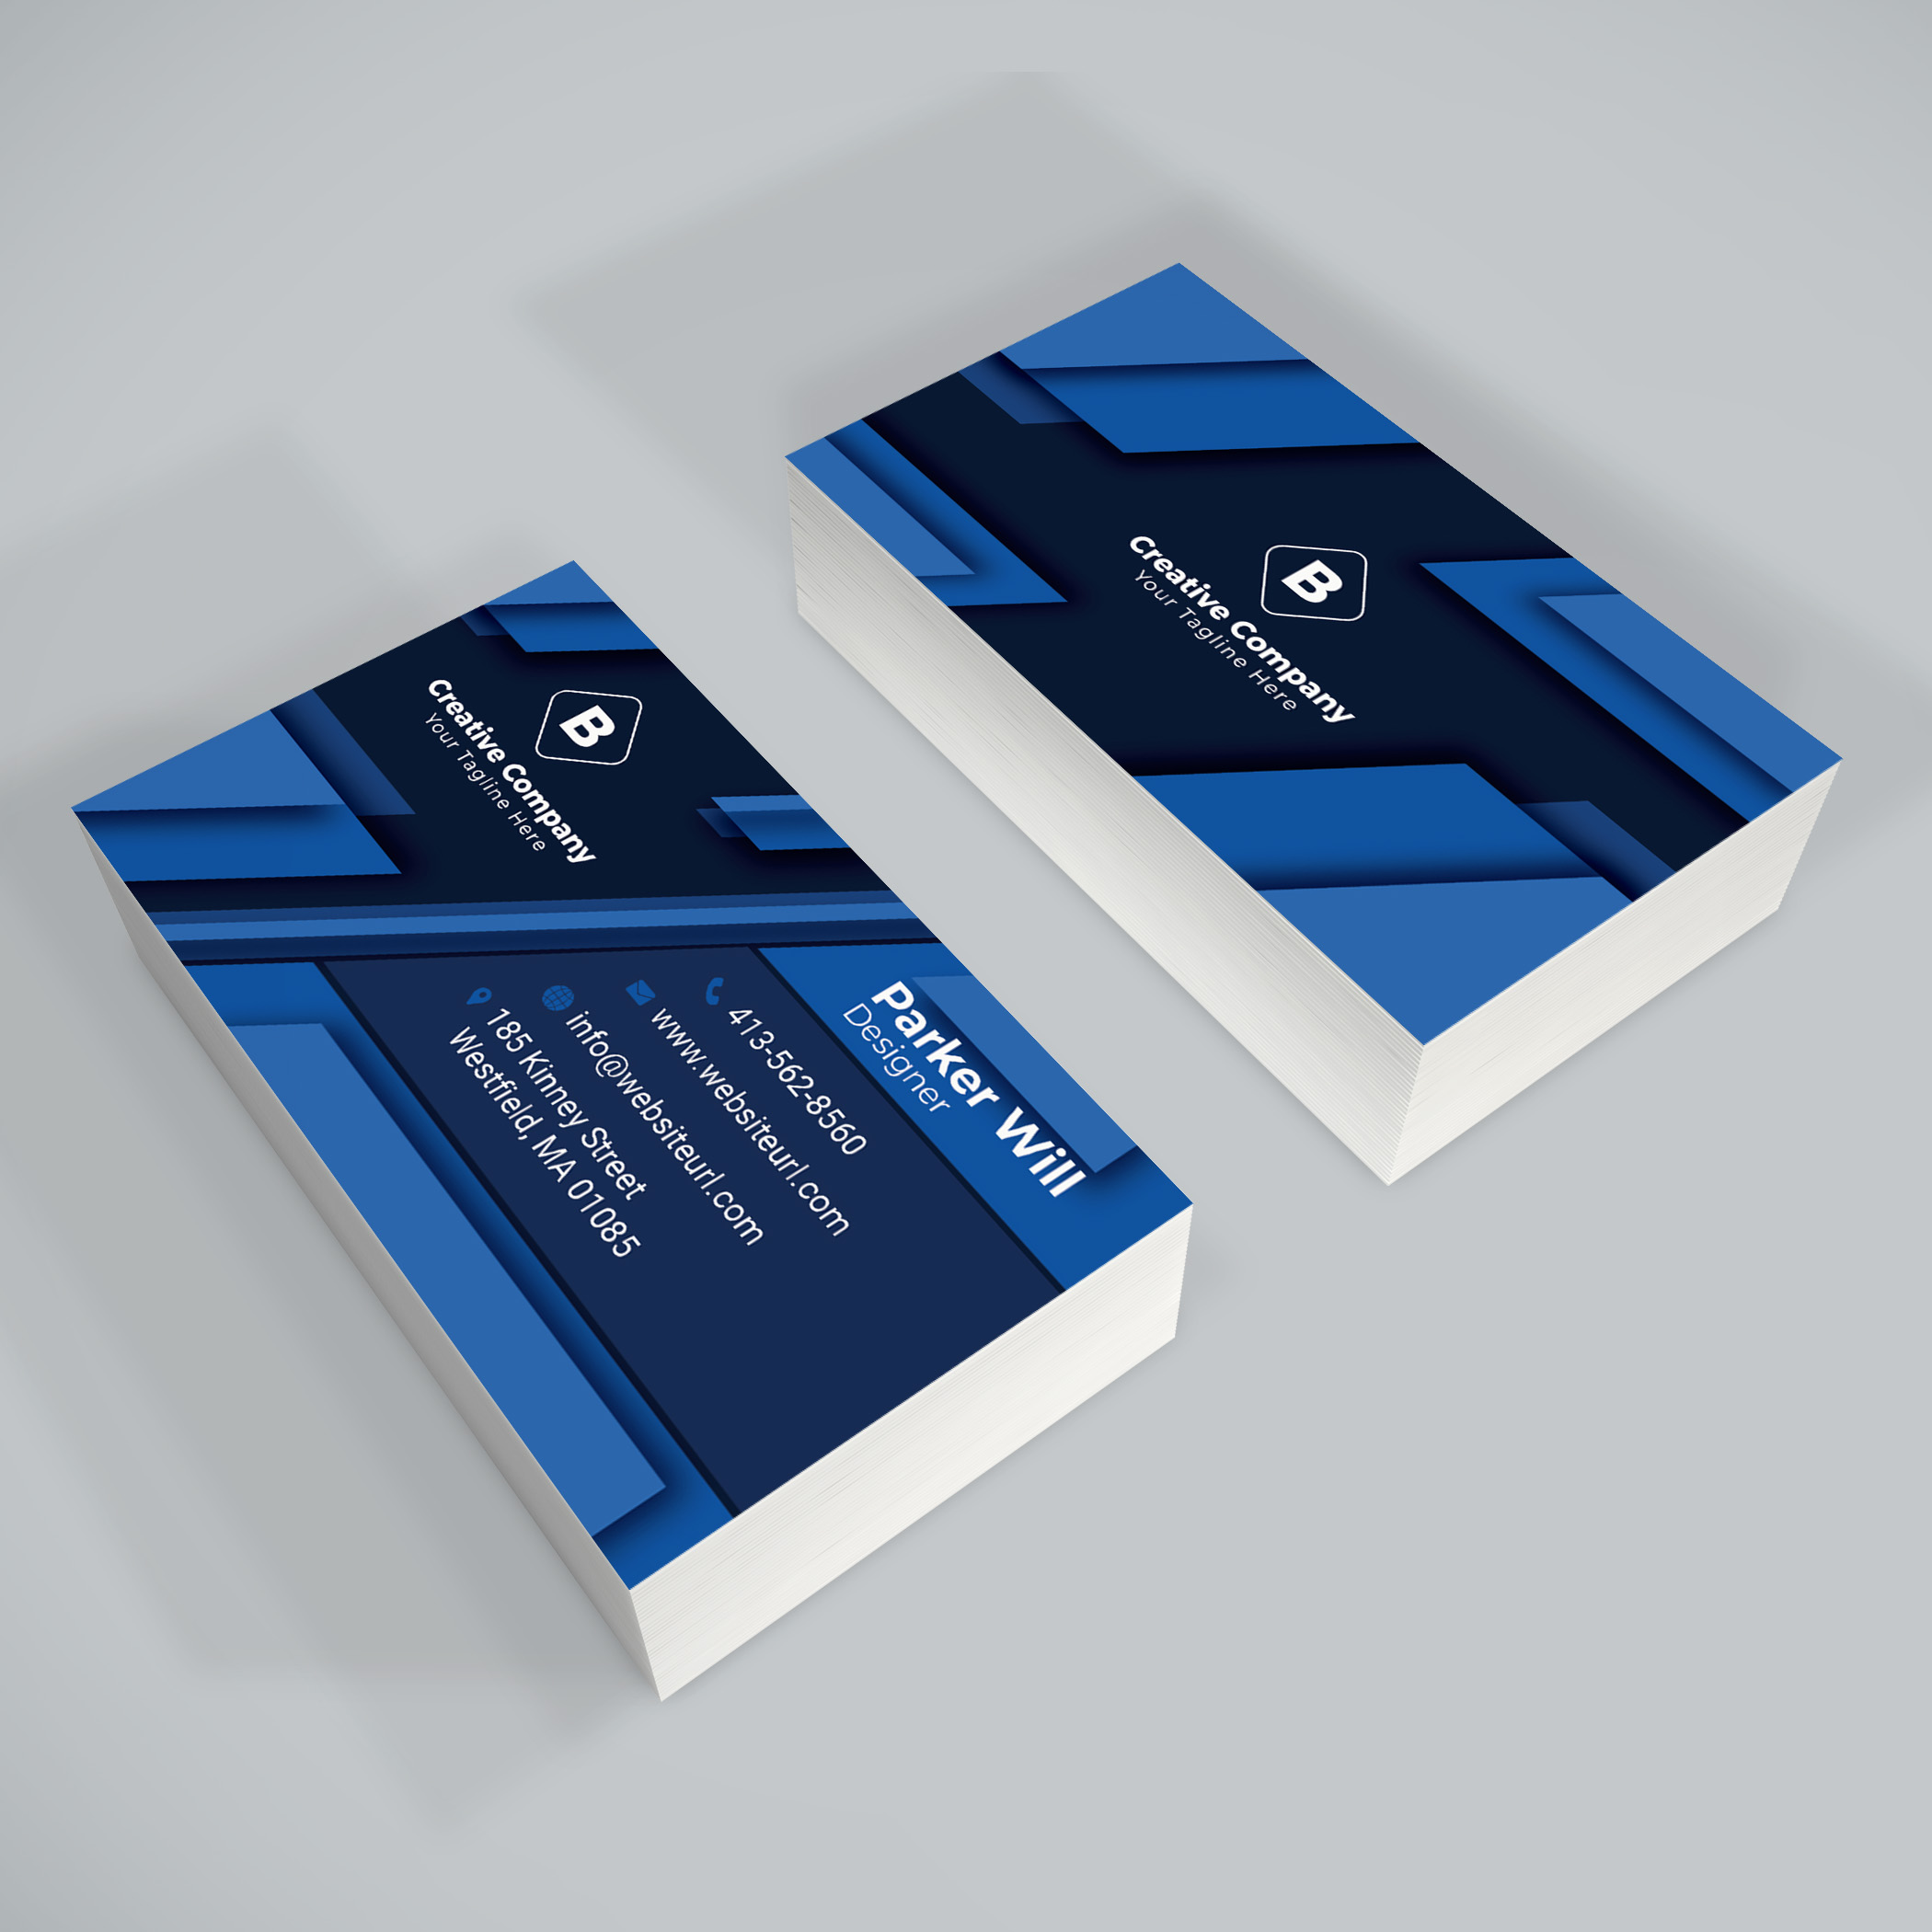 4 Corporate Business Cards Bundle, for your business.